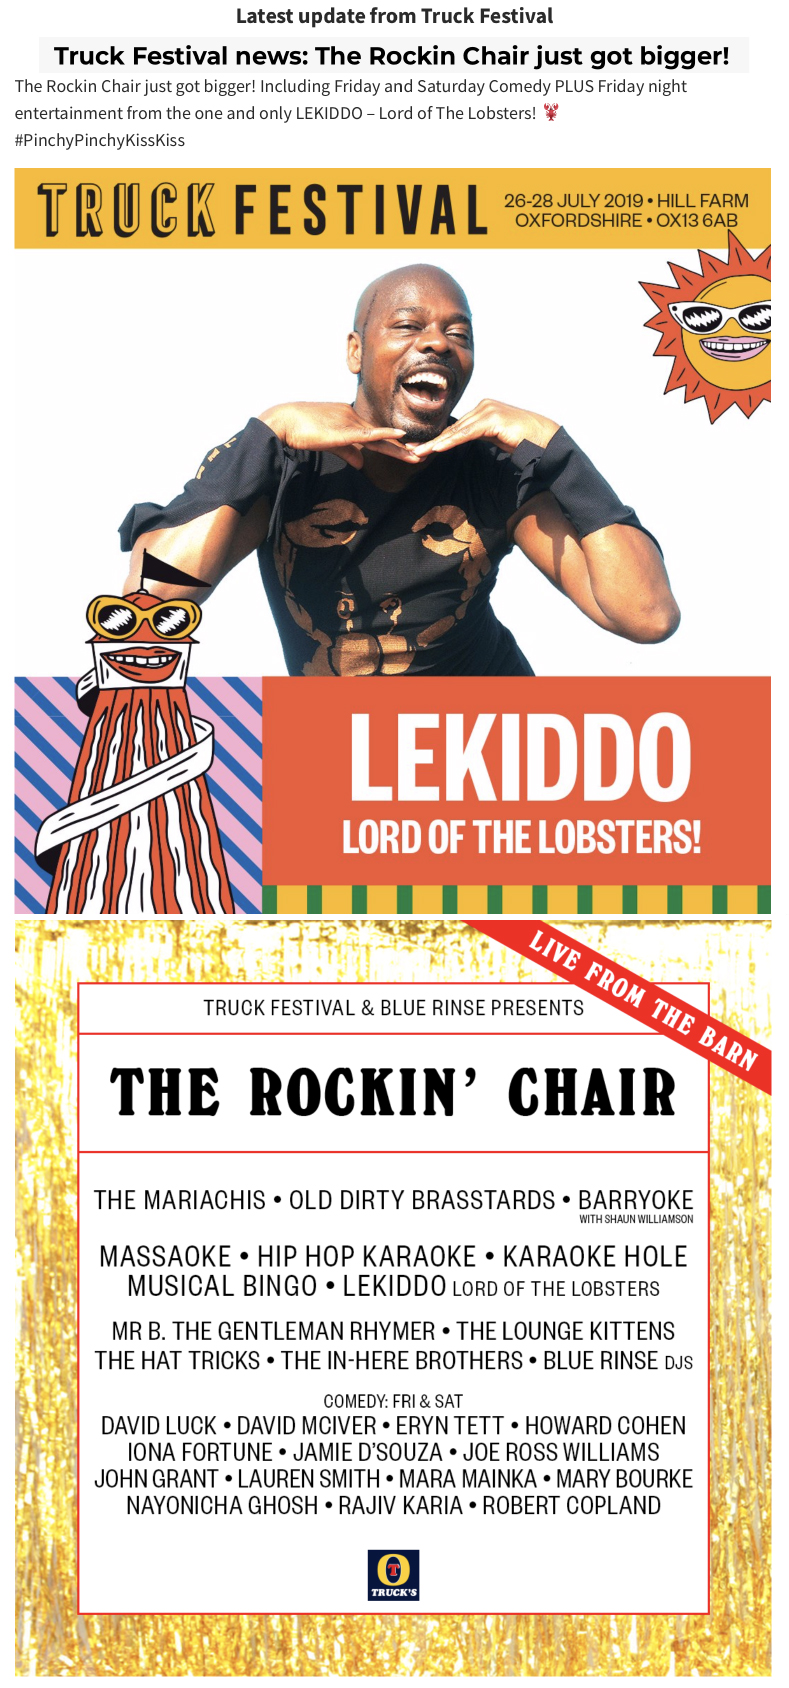 TRUCK 2019
Truck Festival news: The Rockin Chair just got bigger!

Latest update from Truck Festival
The Rockin Chair just got bigger! Including Friday and Saturday Comedy PLUS Friday night entertainment from the one and only LEKIDDO â€“ Lord of The Lobsters! 
#PinchyPinchyKissKiss